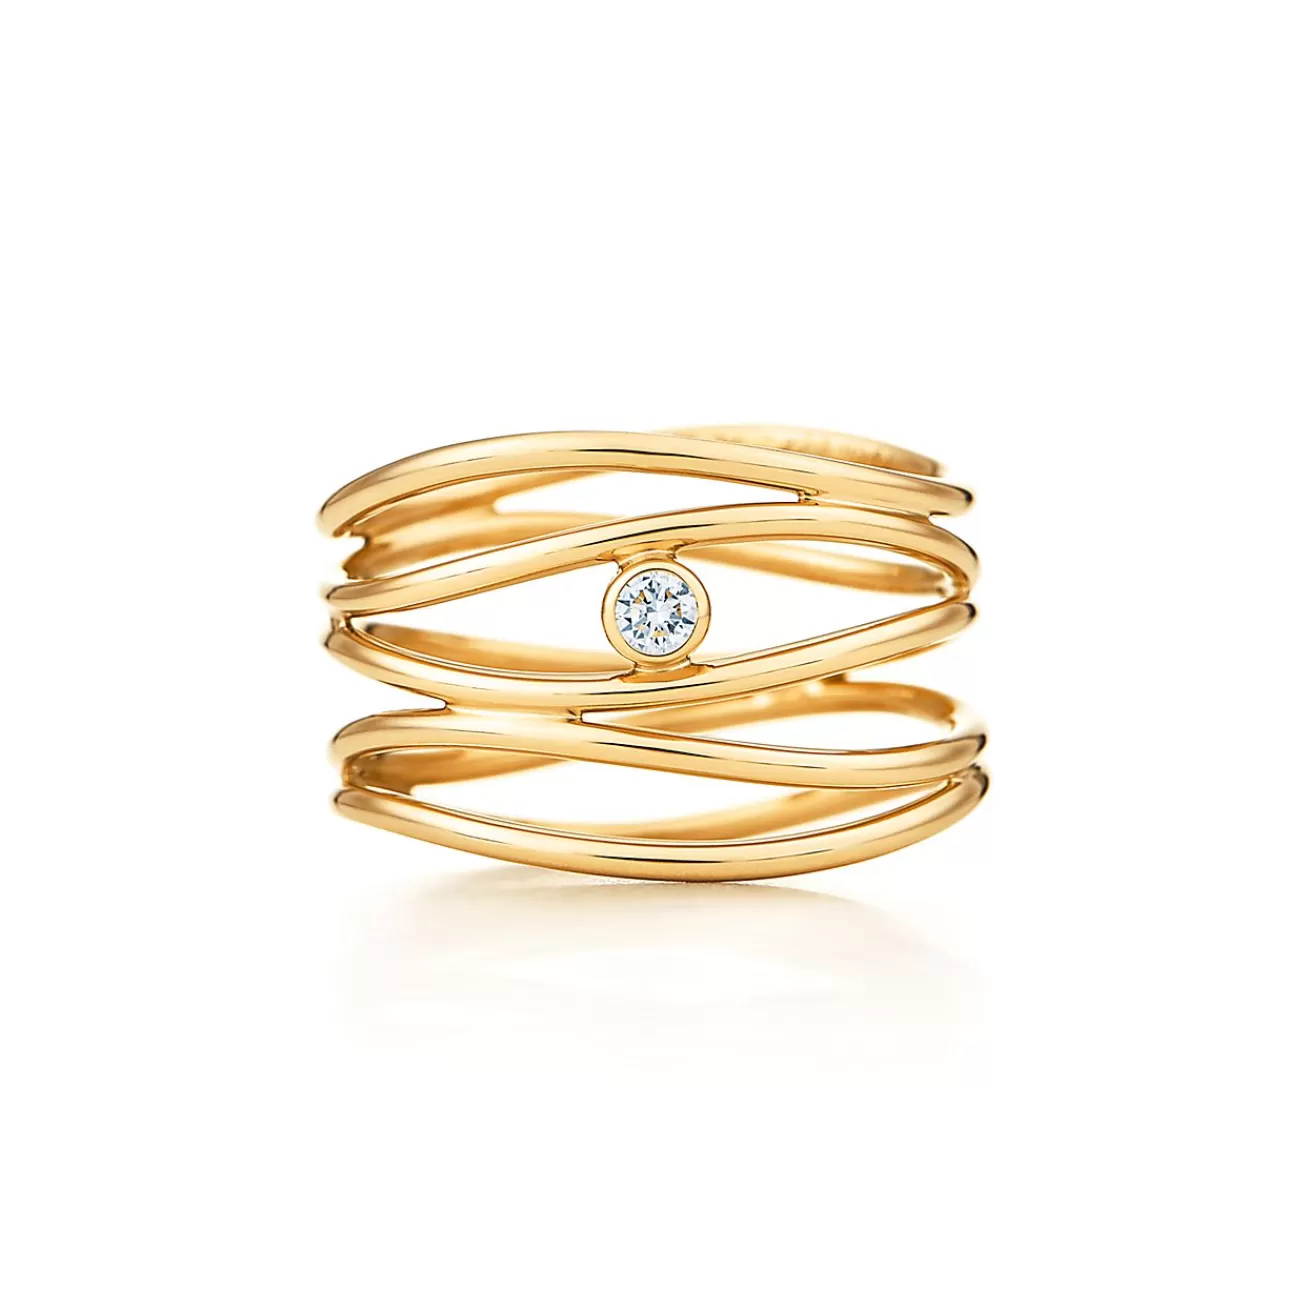 Tiffany & Co. Elsa Peretti® Wave five-row diamond ring in 18k gold. | ^ Rings | Gold Jewelry